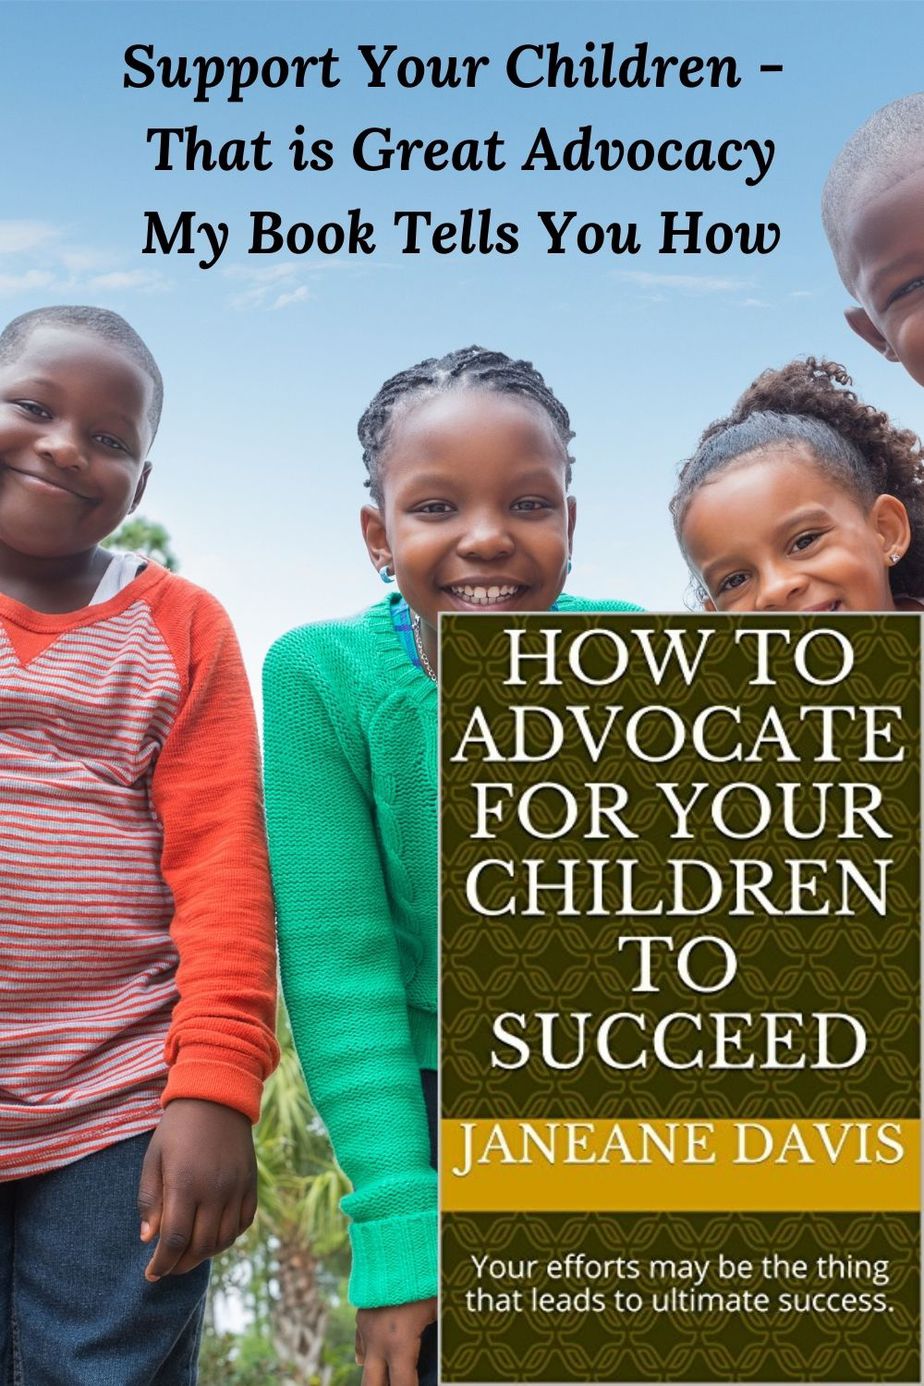 Photo of 4 smiling African American children and a cover of the book "How to Advocate for Your Children" Support Your Children - That is Great Advocacy My Book Will Show You How